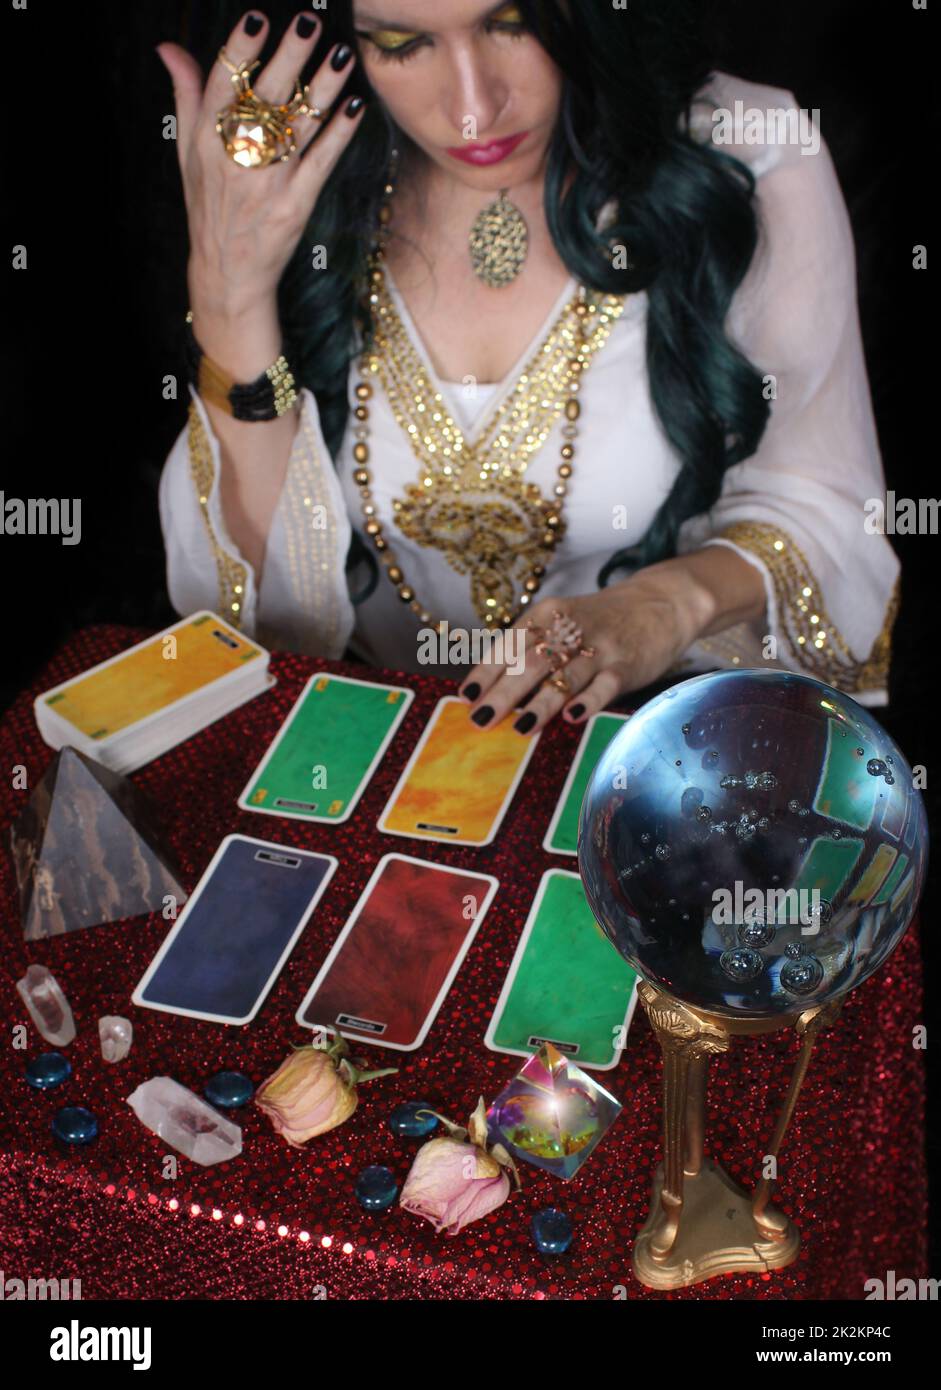 Psychic with crystal ball and tarot cards, Shallow DOF Stock Photo